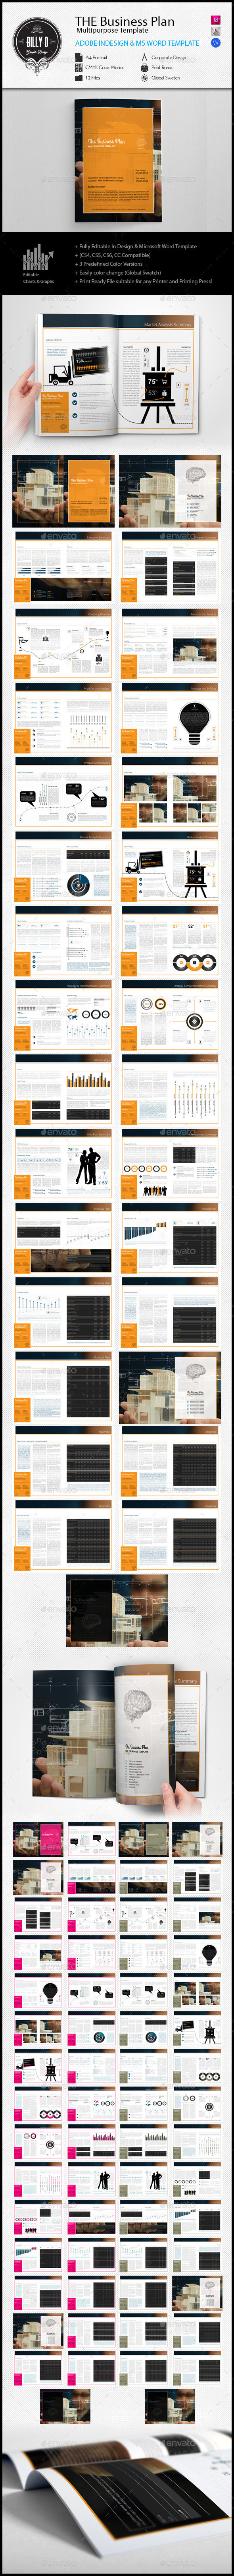 The 20business 20plan 20  20multipurpose 20template 20preview 20image 20590x